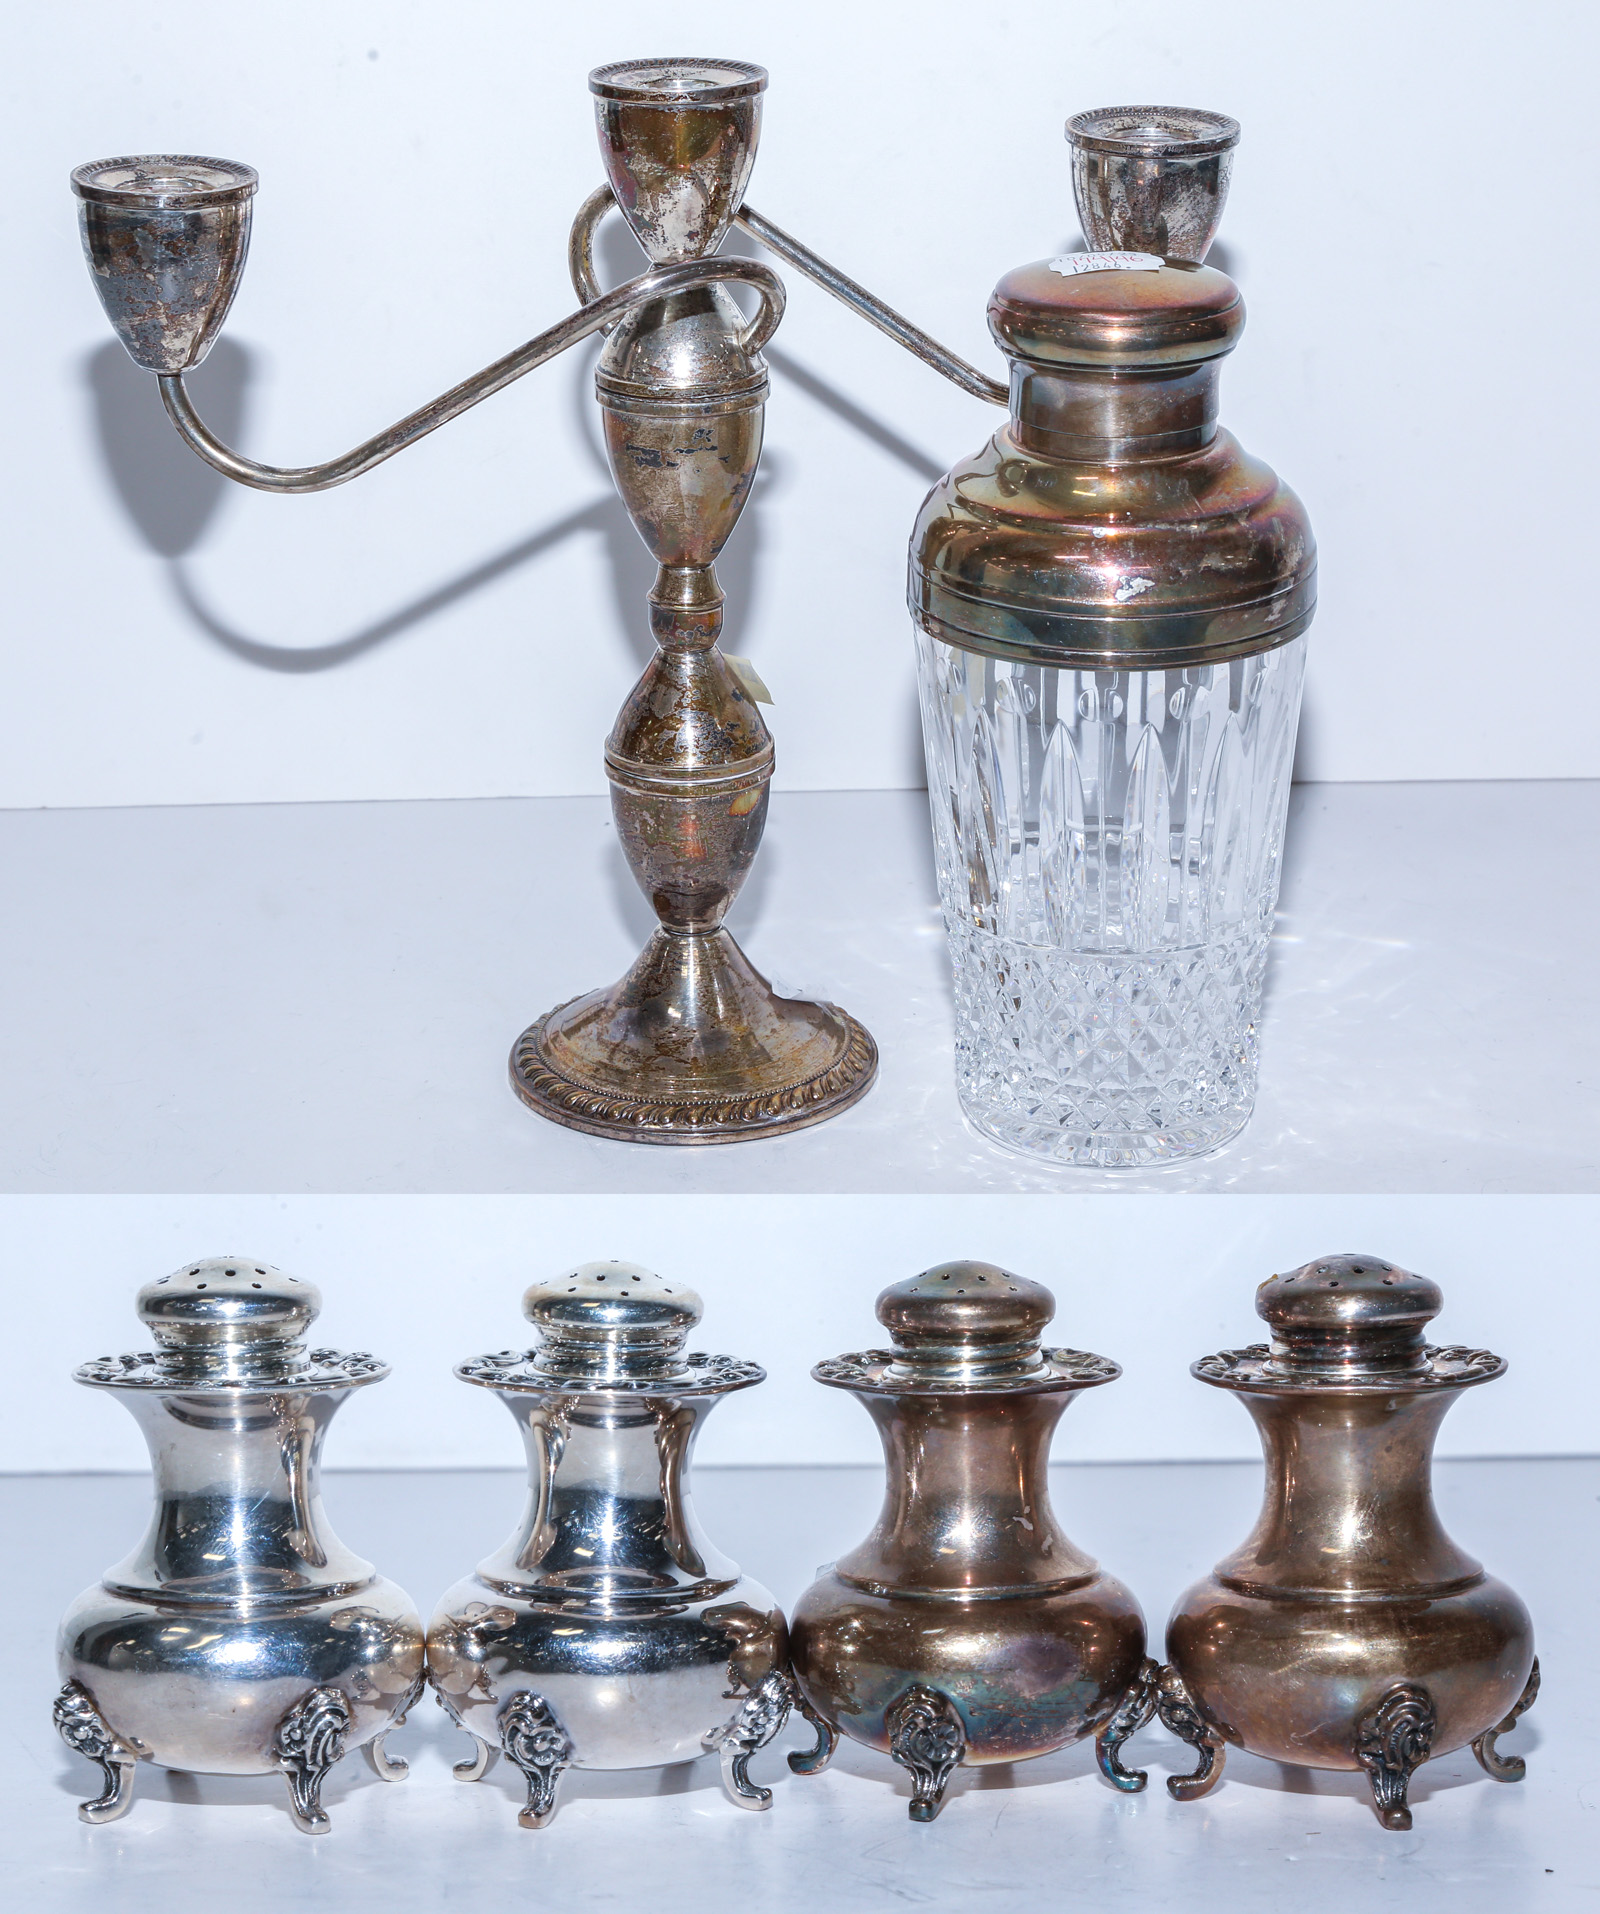 GROUP OF STERLING TABLE ITEMS including 3cb310